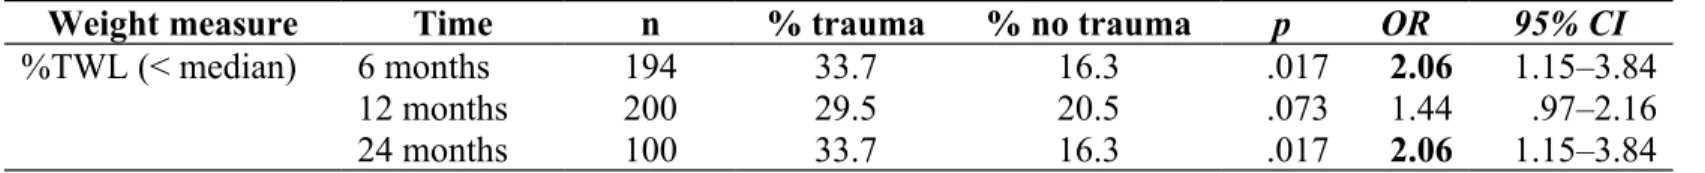 Table 2. Associations of traumatic experience with post-surgery lower weight-loss.